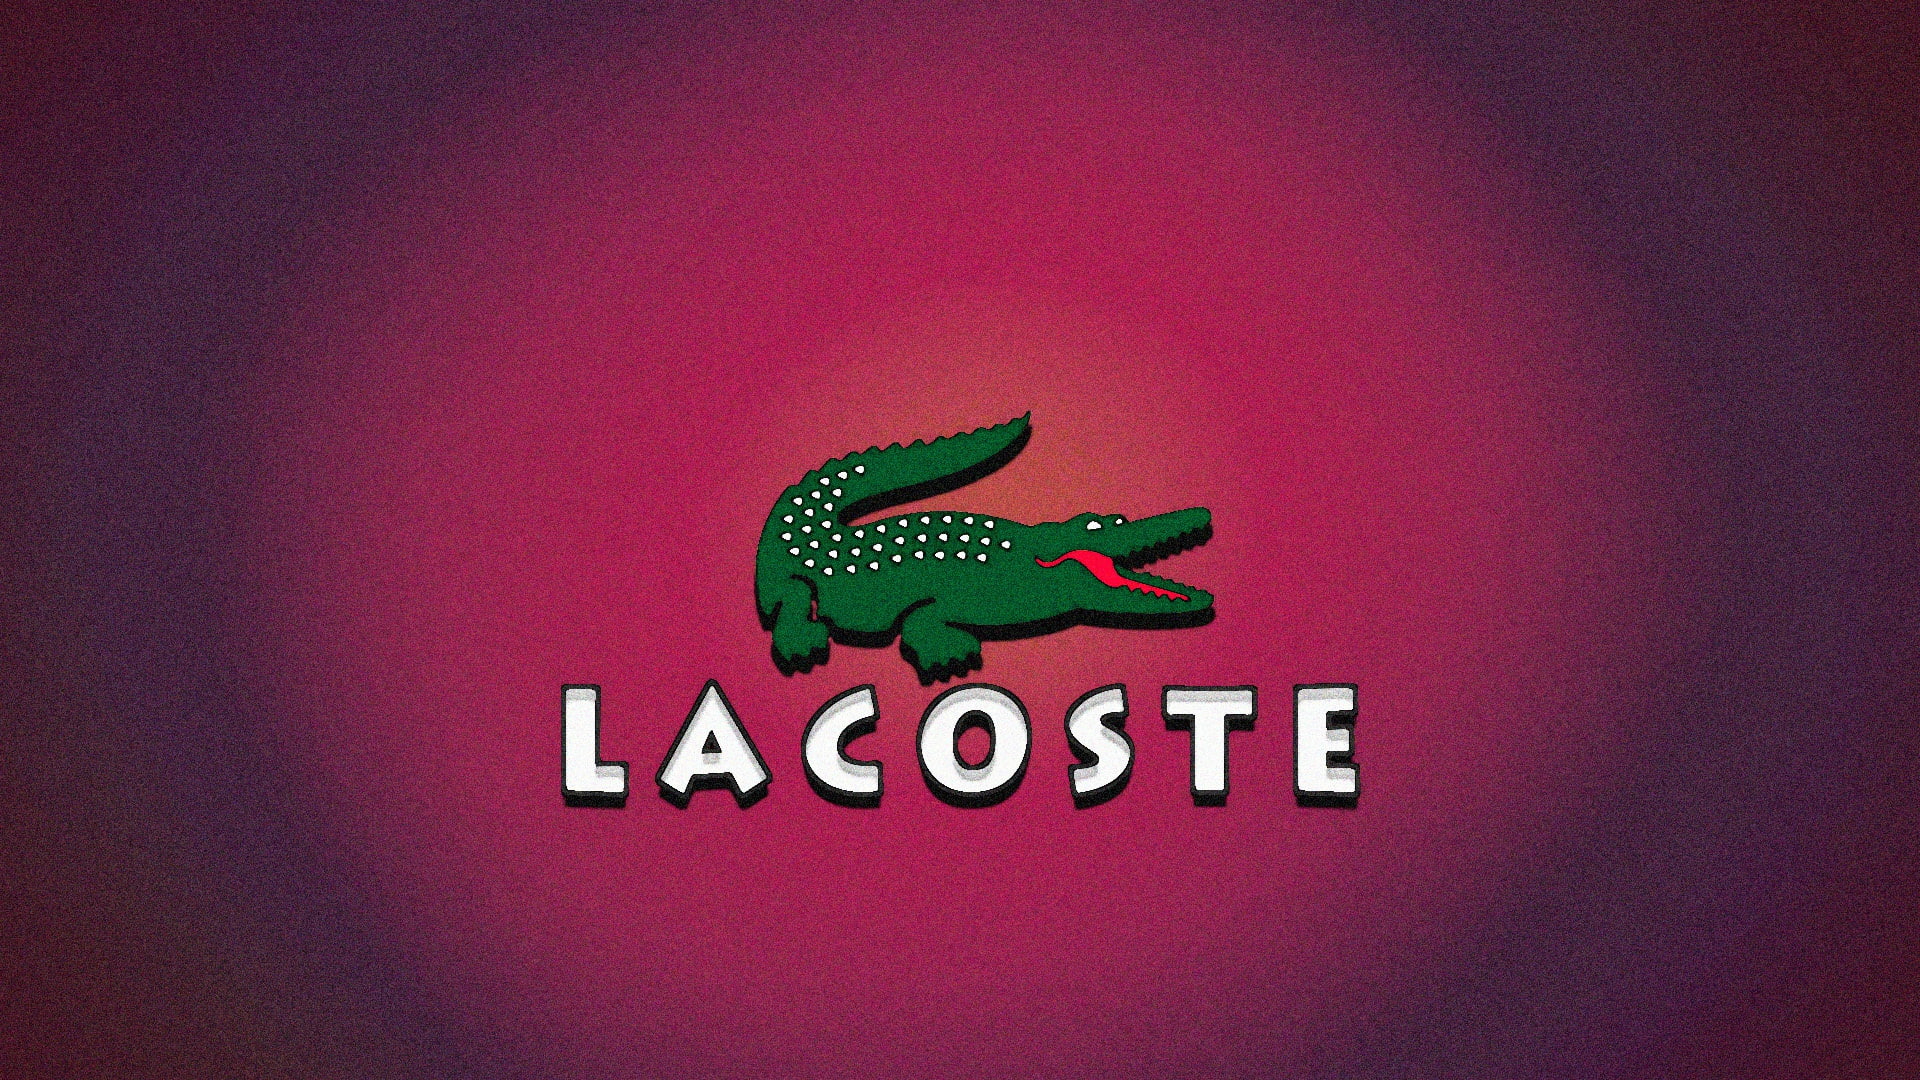 Wallpaper Style, Clothing, Crocodile, Fashion, Lacoste Wallpaper, Other